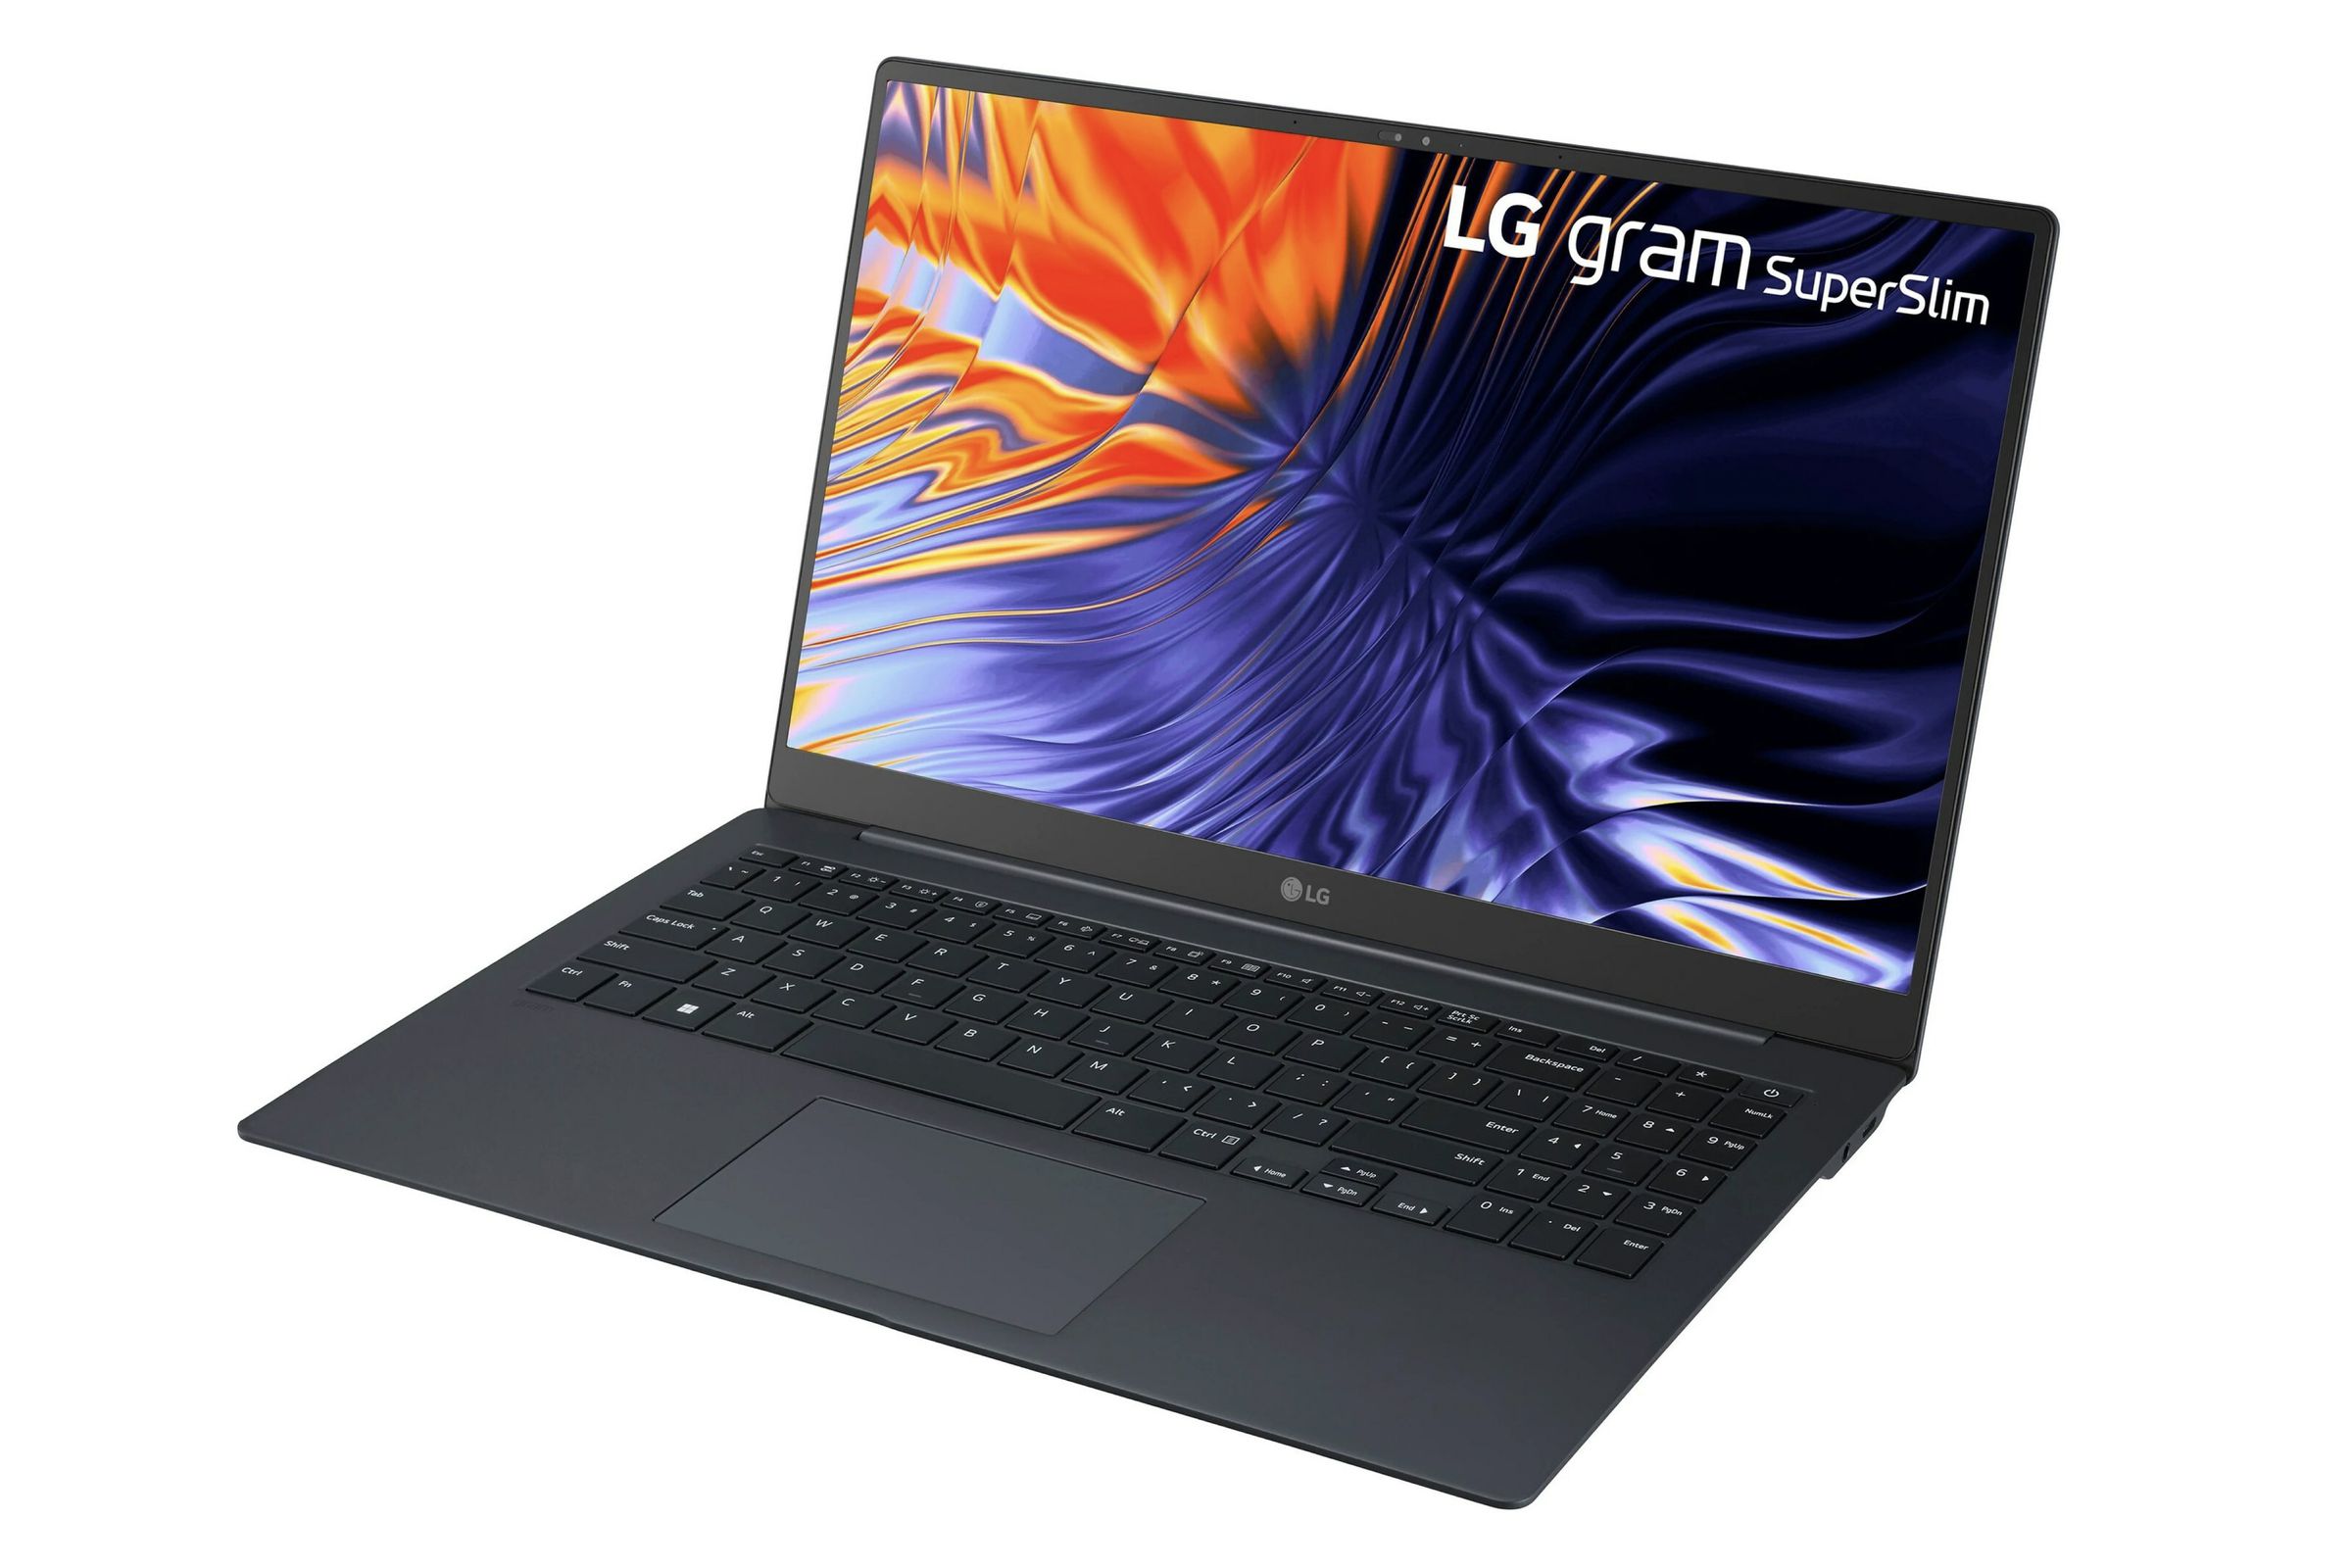 LG’s dark gray laptop on a white background with a water reflection wallpaper on the screen.